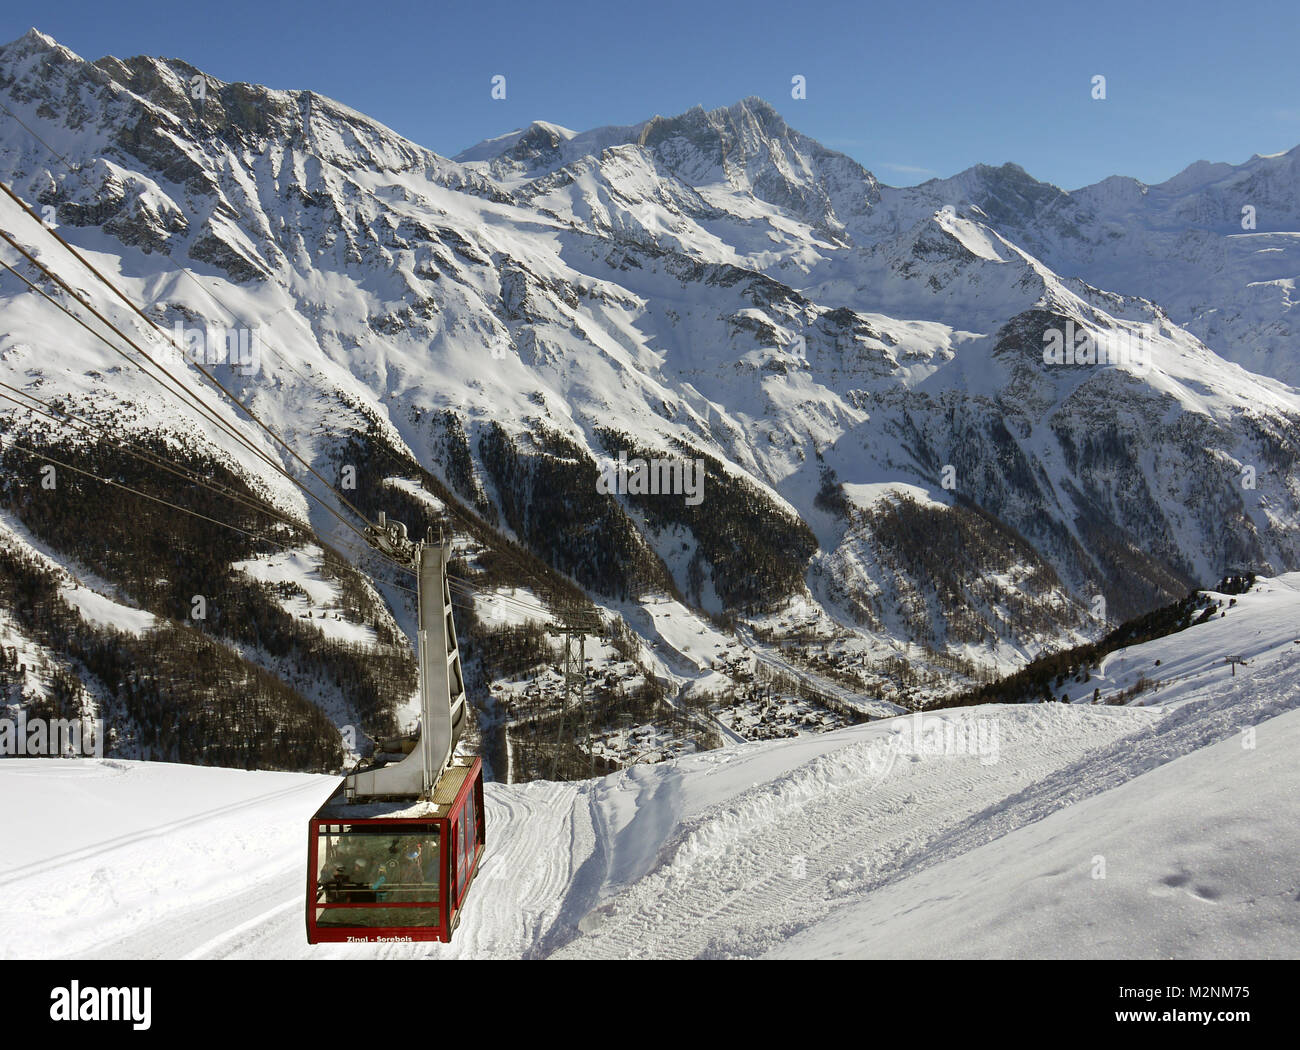 Winter scenes in the snowsports resort of Zinal in the Valais canton of Switzerland. Cable car from Zinal to the slopes at Sorebois Stock Photo